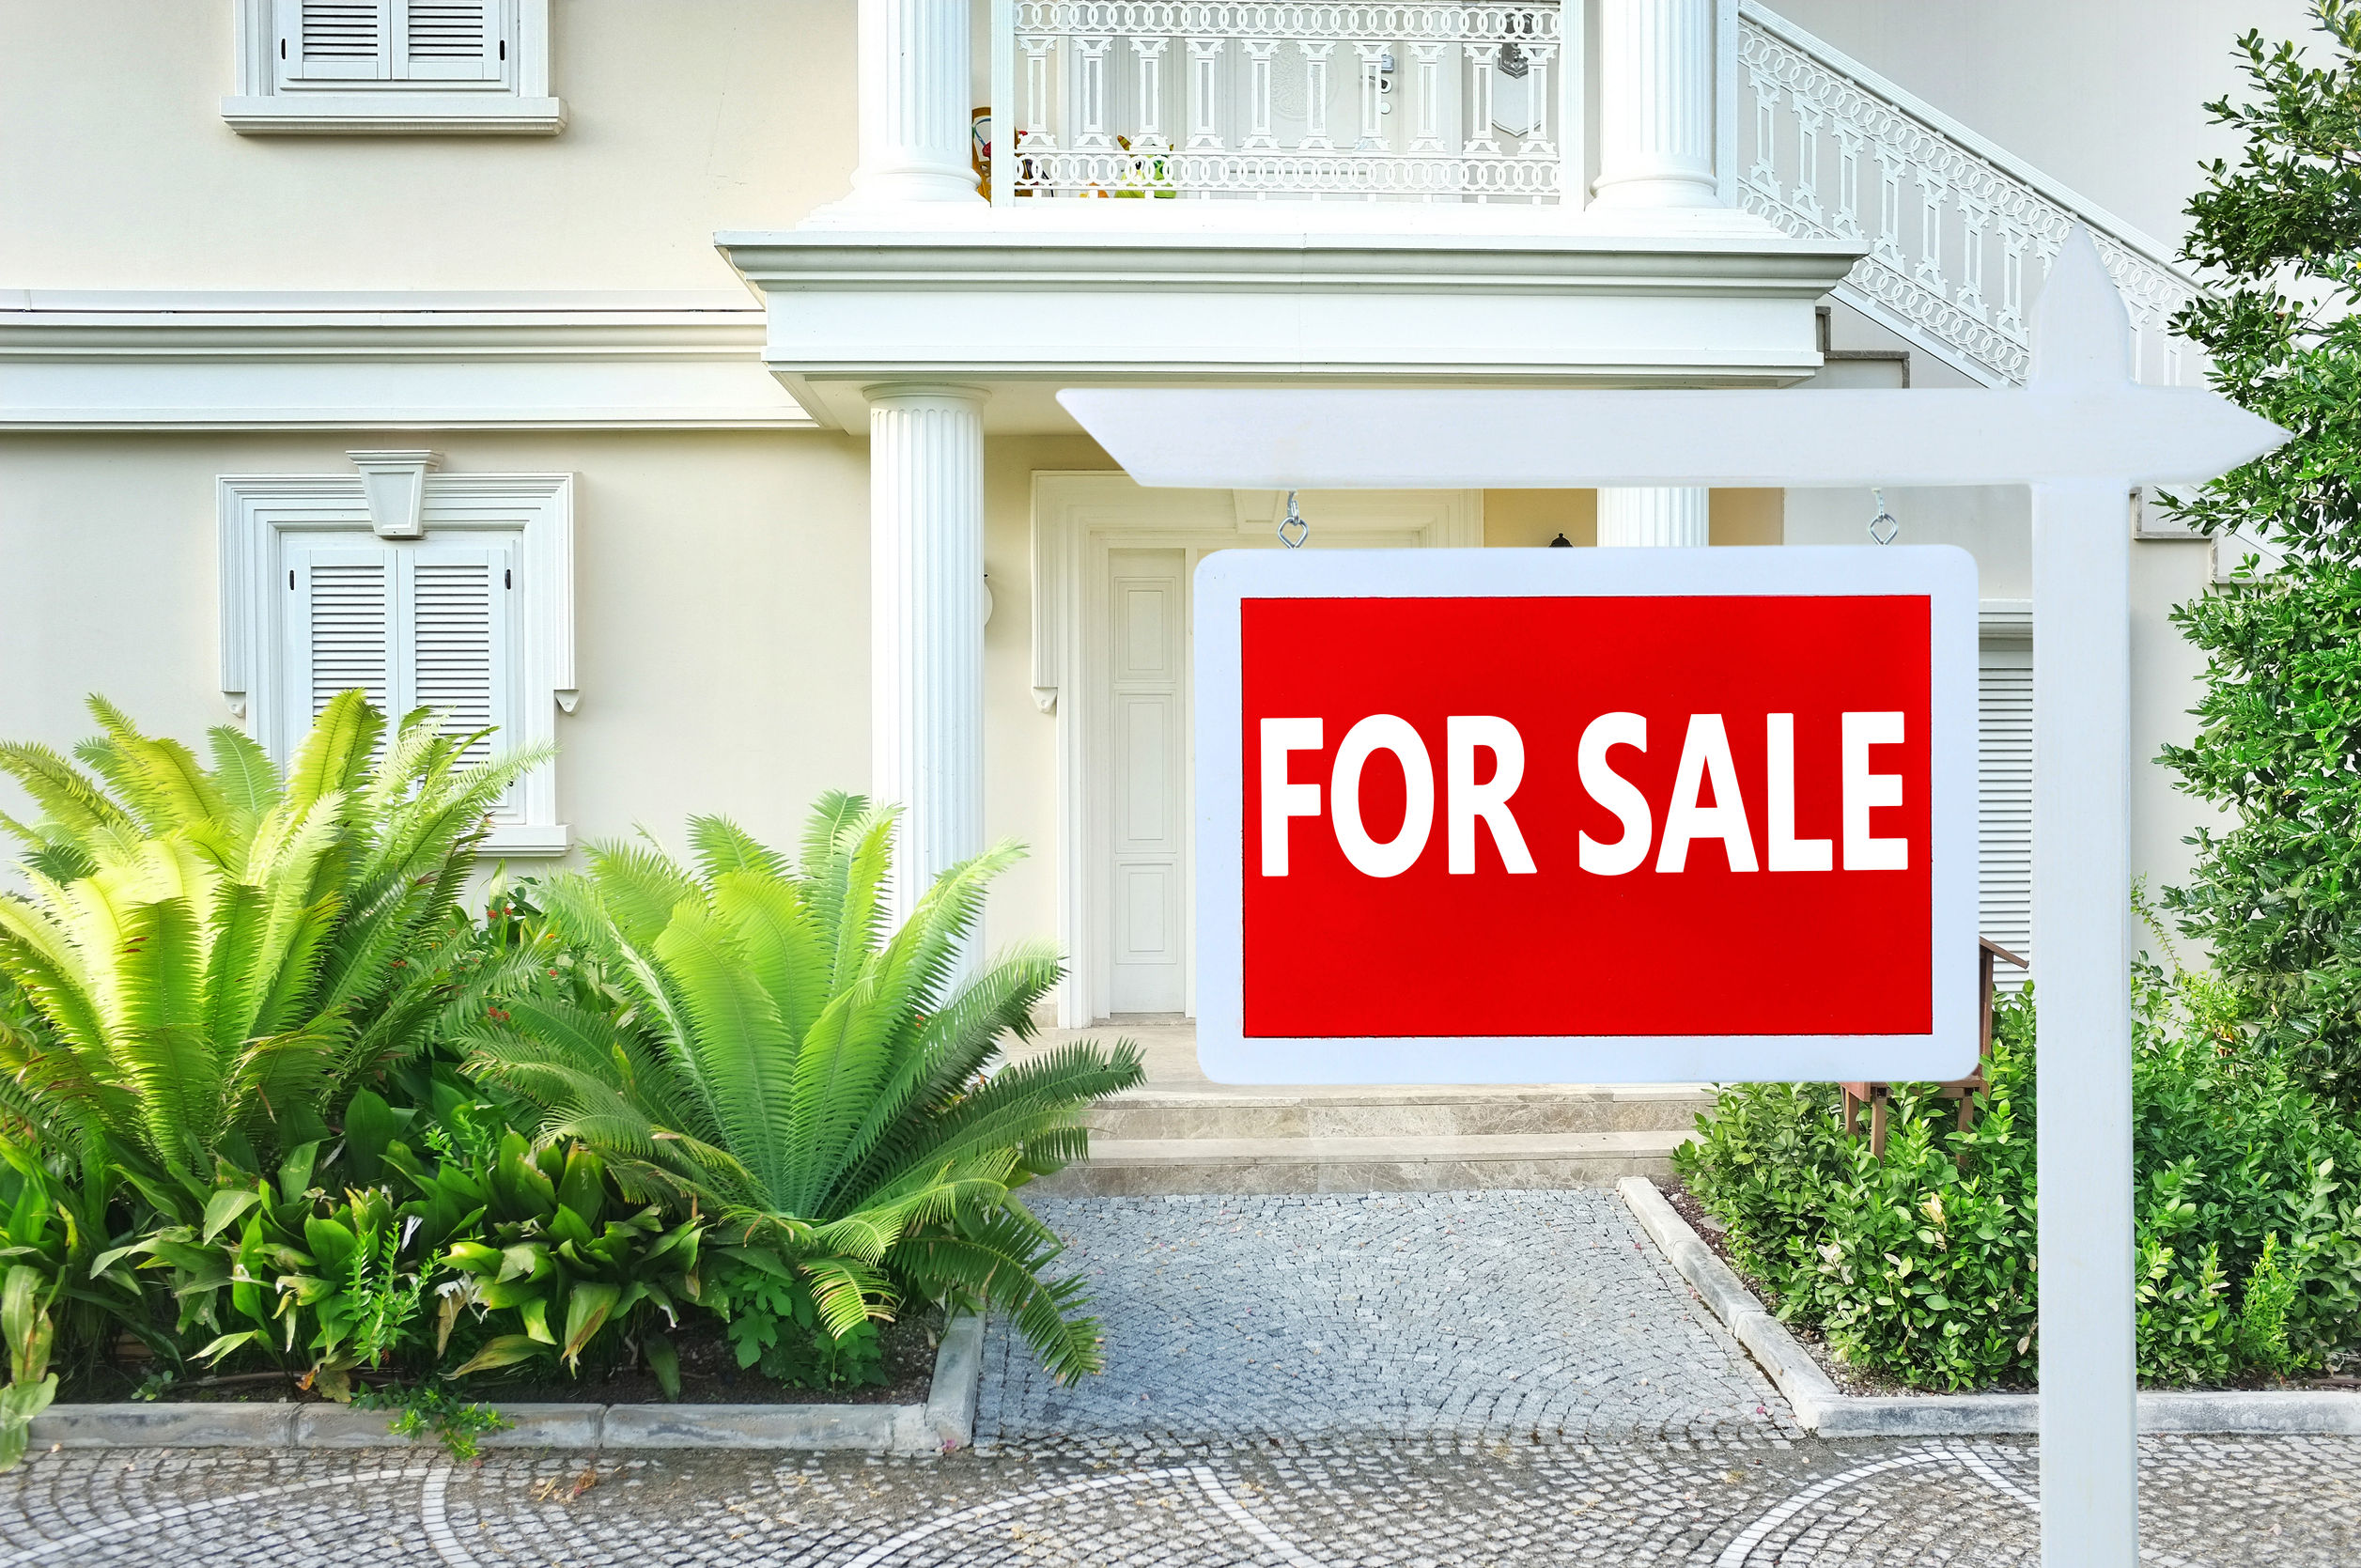 48258829 - real estate sign in front of new house for sale